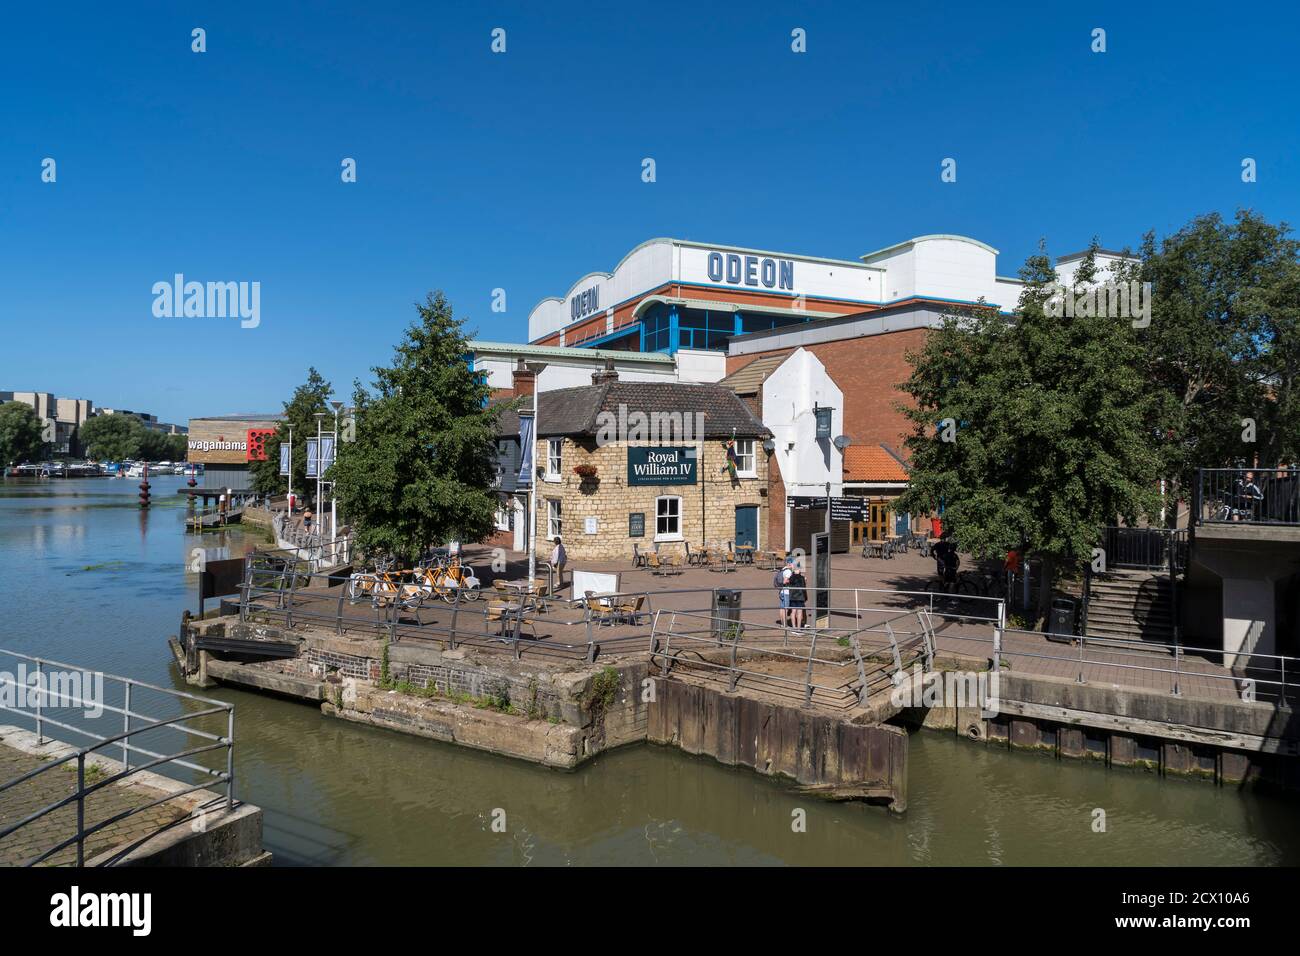 Royal William IV Brayford Wharf North Lincoln City Lincolnshire août 2020 Banque D'Images